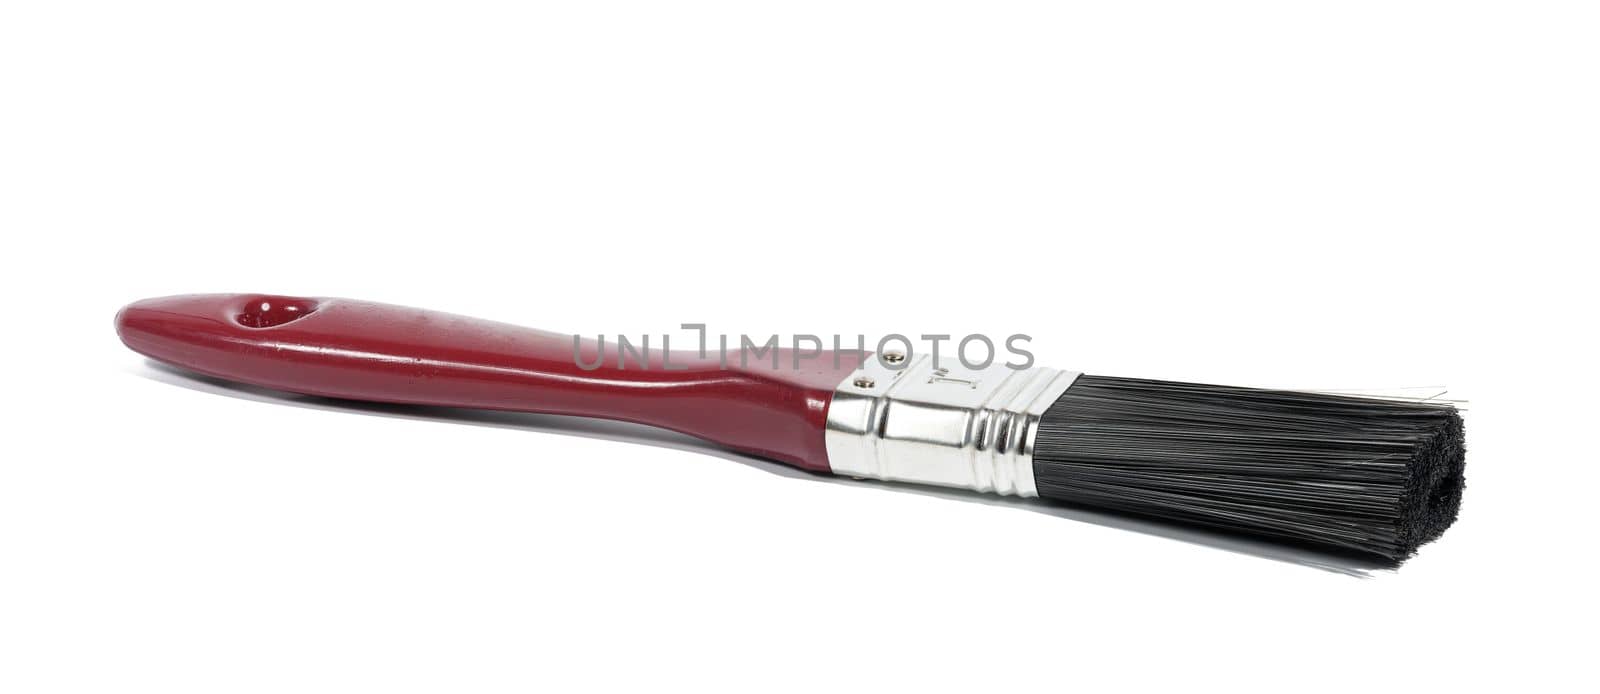 New paint brush with wooden brown handle isolated on white background, top view